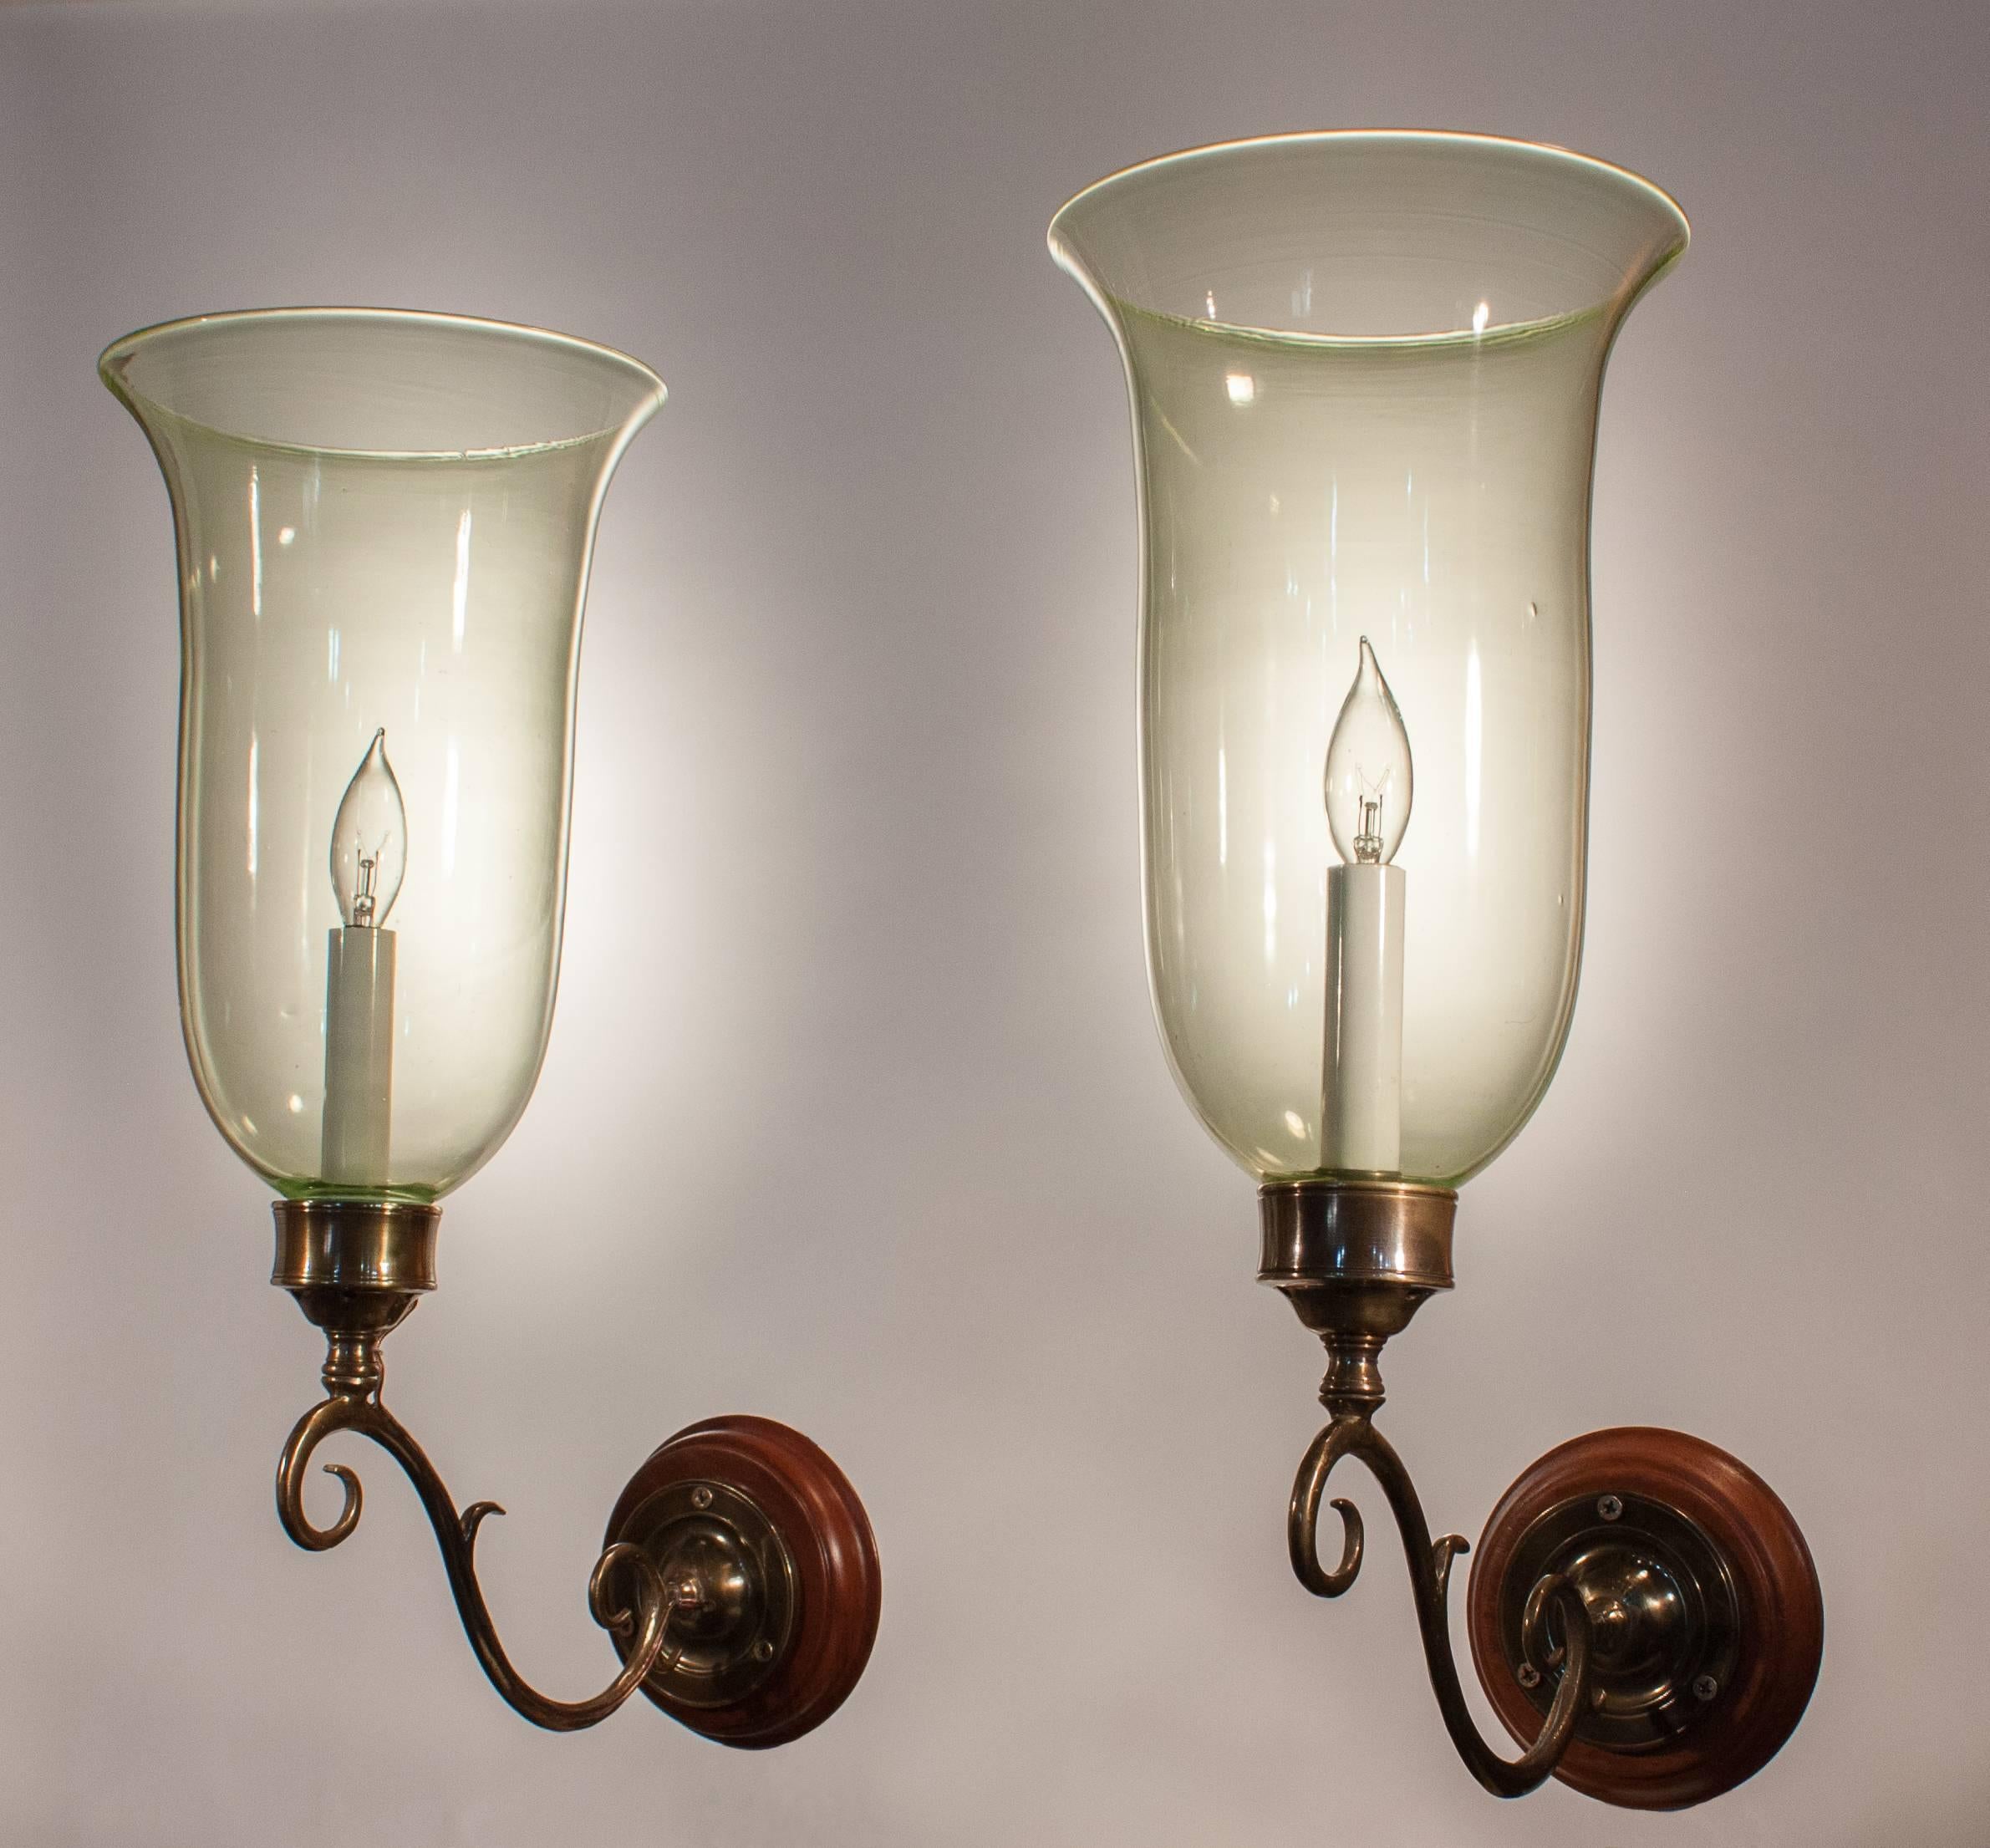 A rare and exceptional pair of late 19th century English hurricane shades with full flared form and subtly tinted vaseline-colored handblown glass. Originally for candles, the sconces have been newly electrified and cast a soft light from a single